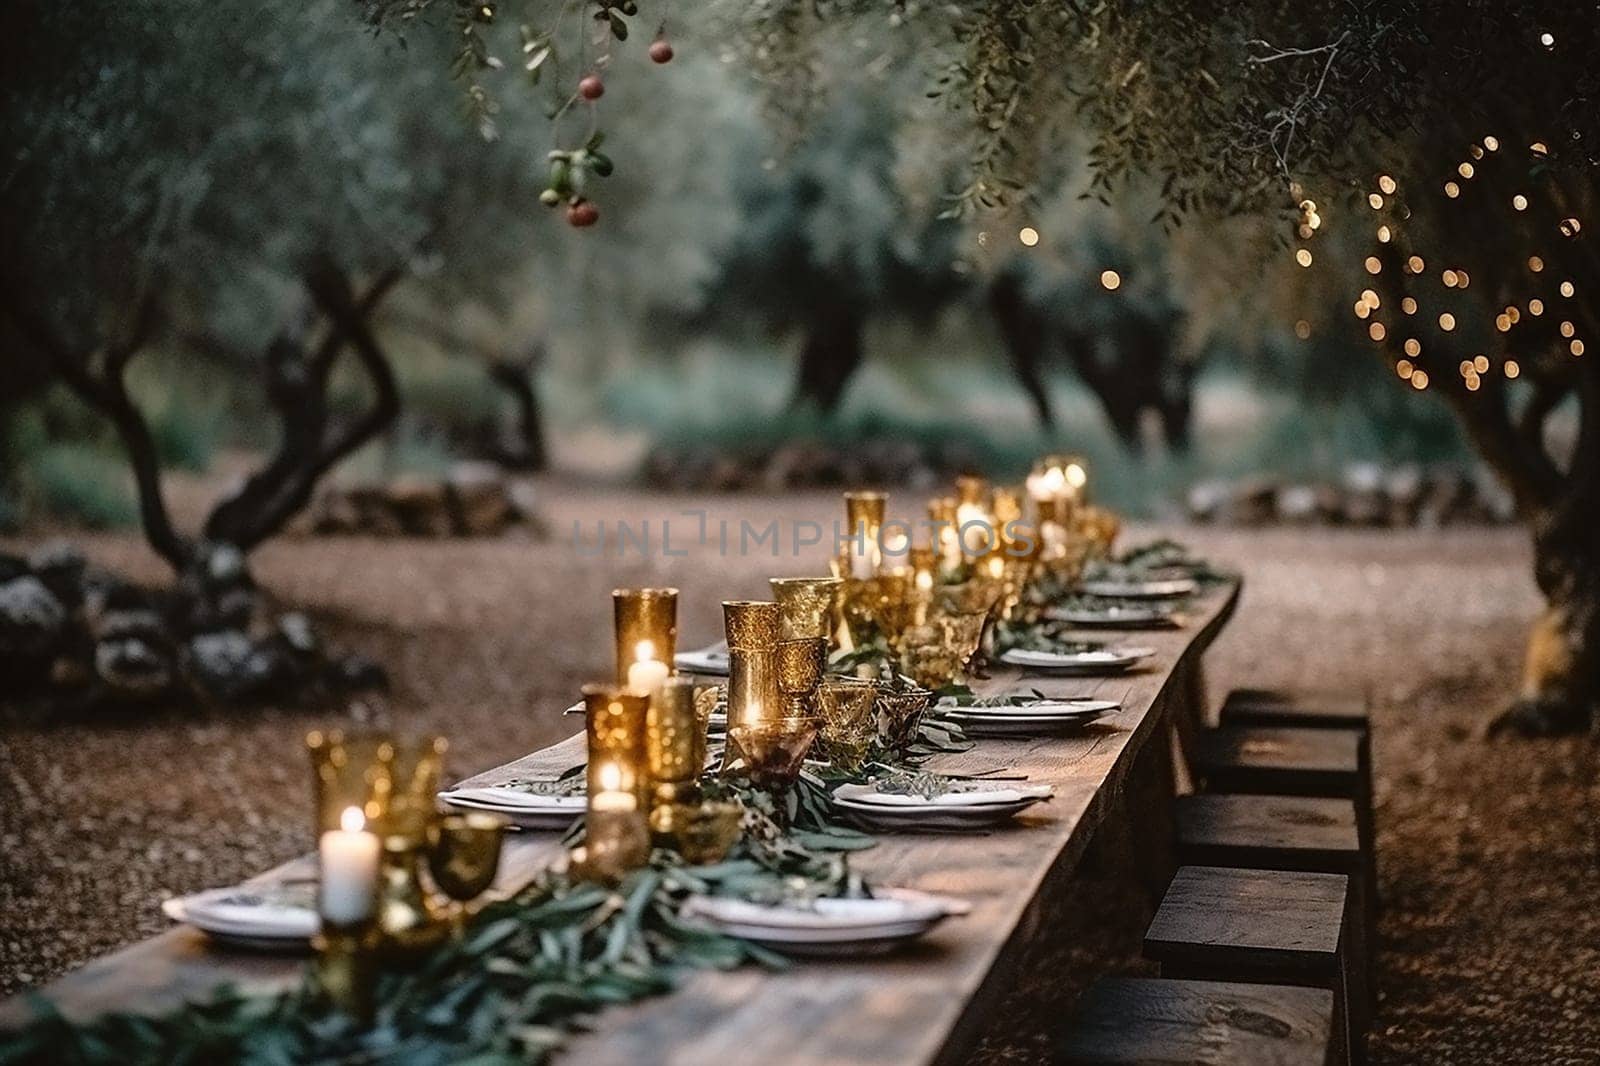 Elegant outdoor dining setup with a long table, candles light by Hype2art